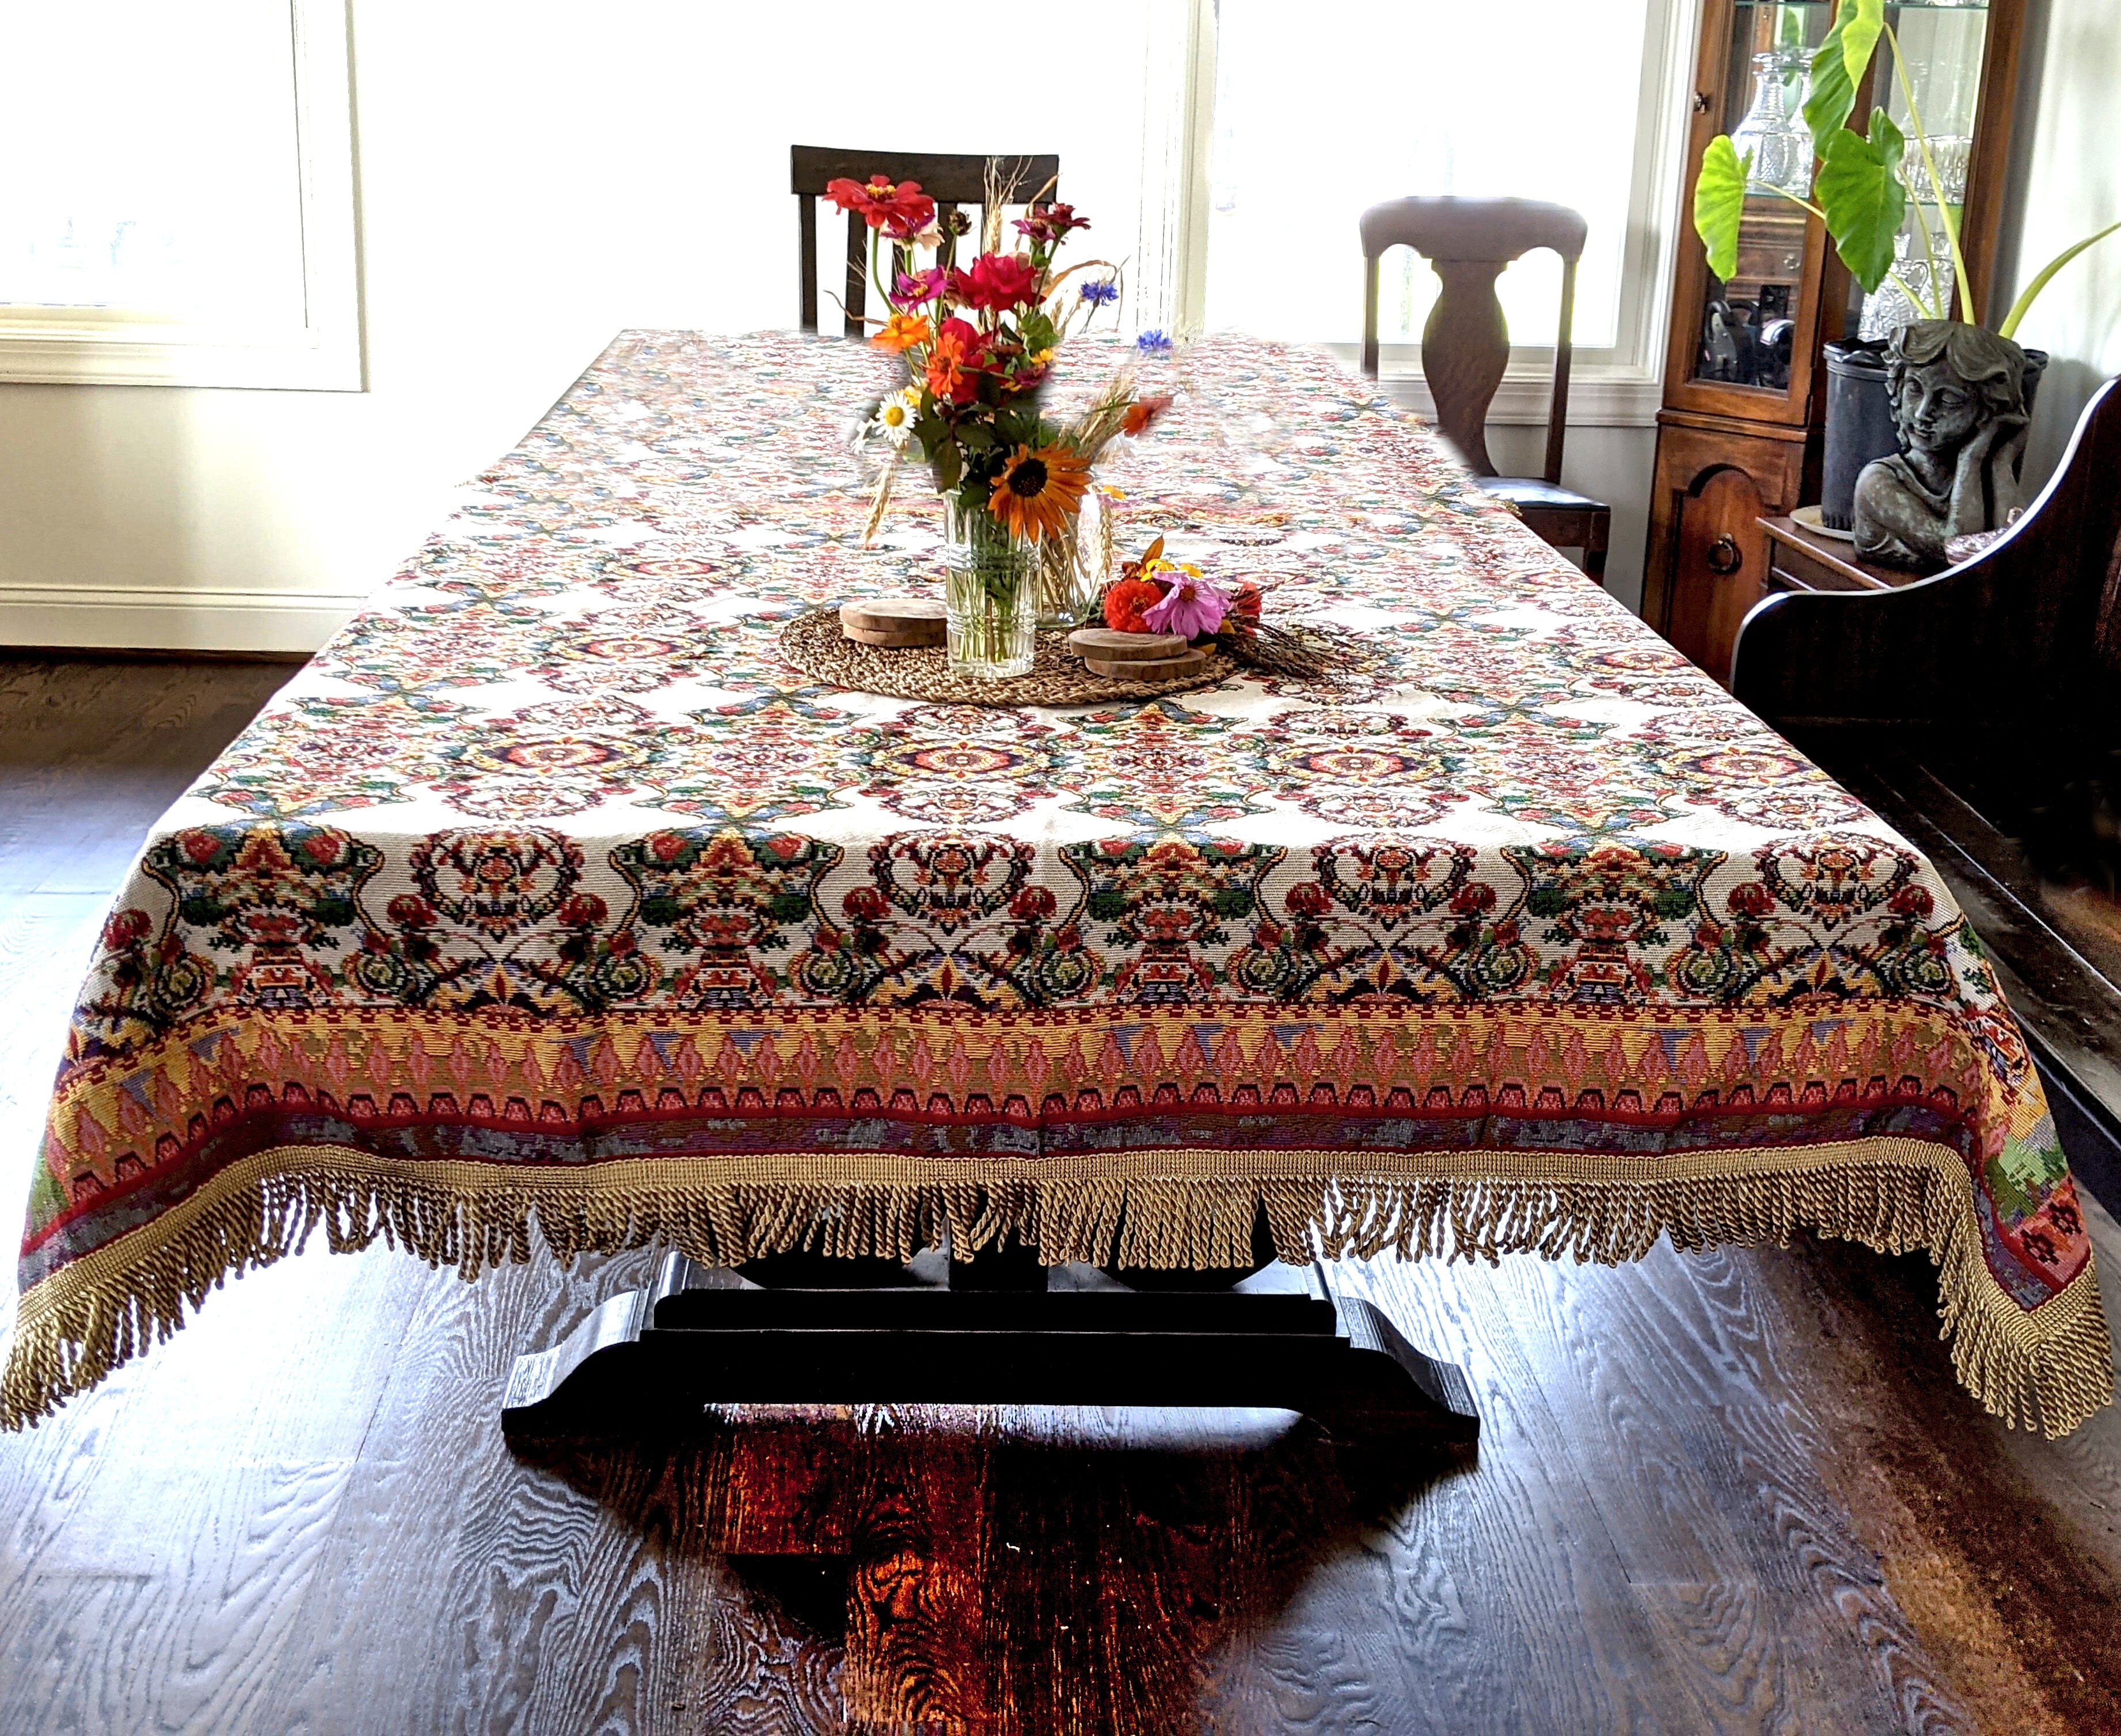 Tache Elegant Ivory Colorful Ornate Paisley Woven Tapestry Tablecloth  (18193)